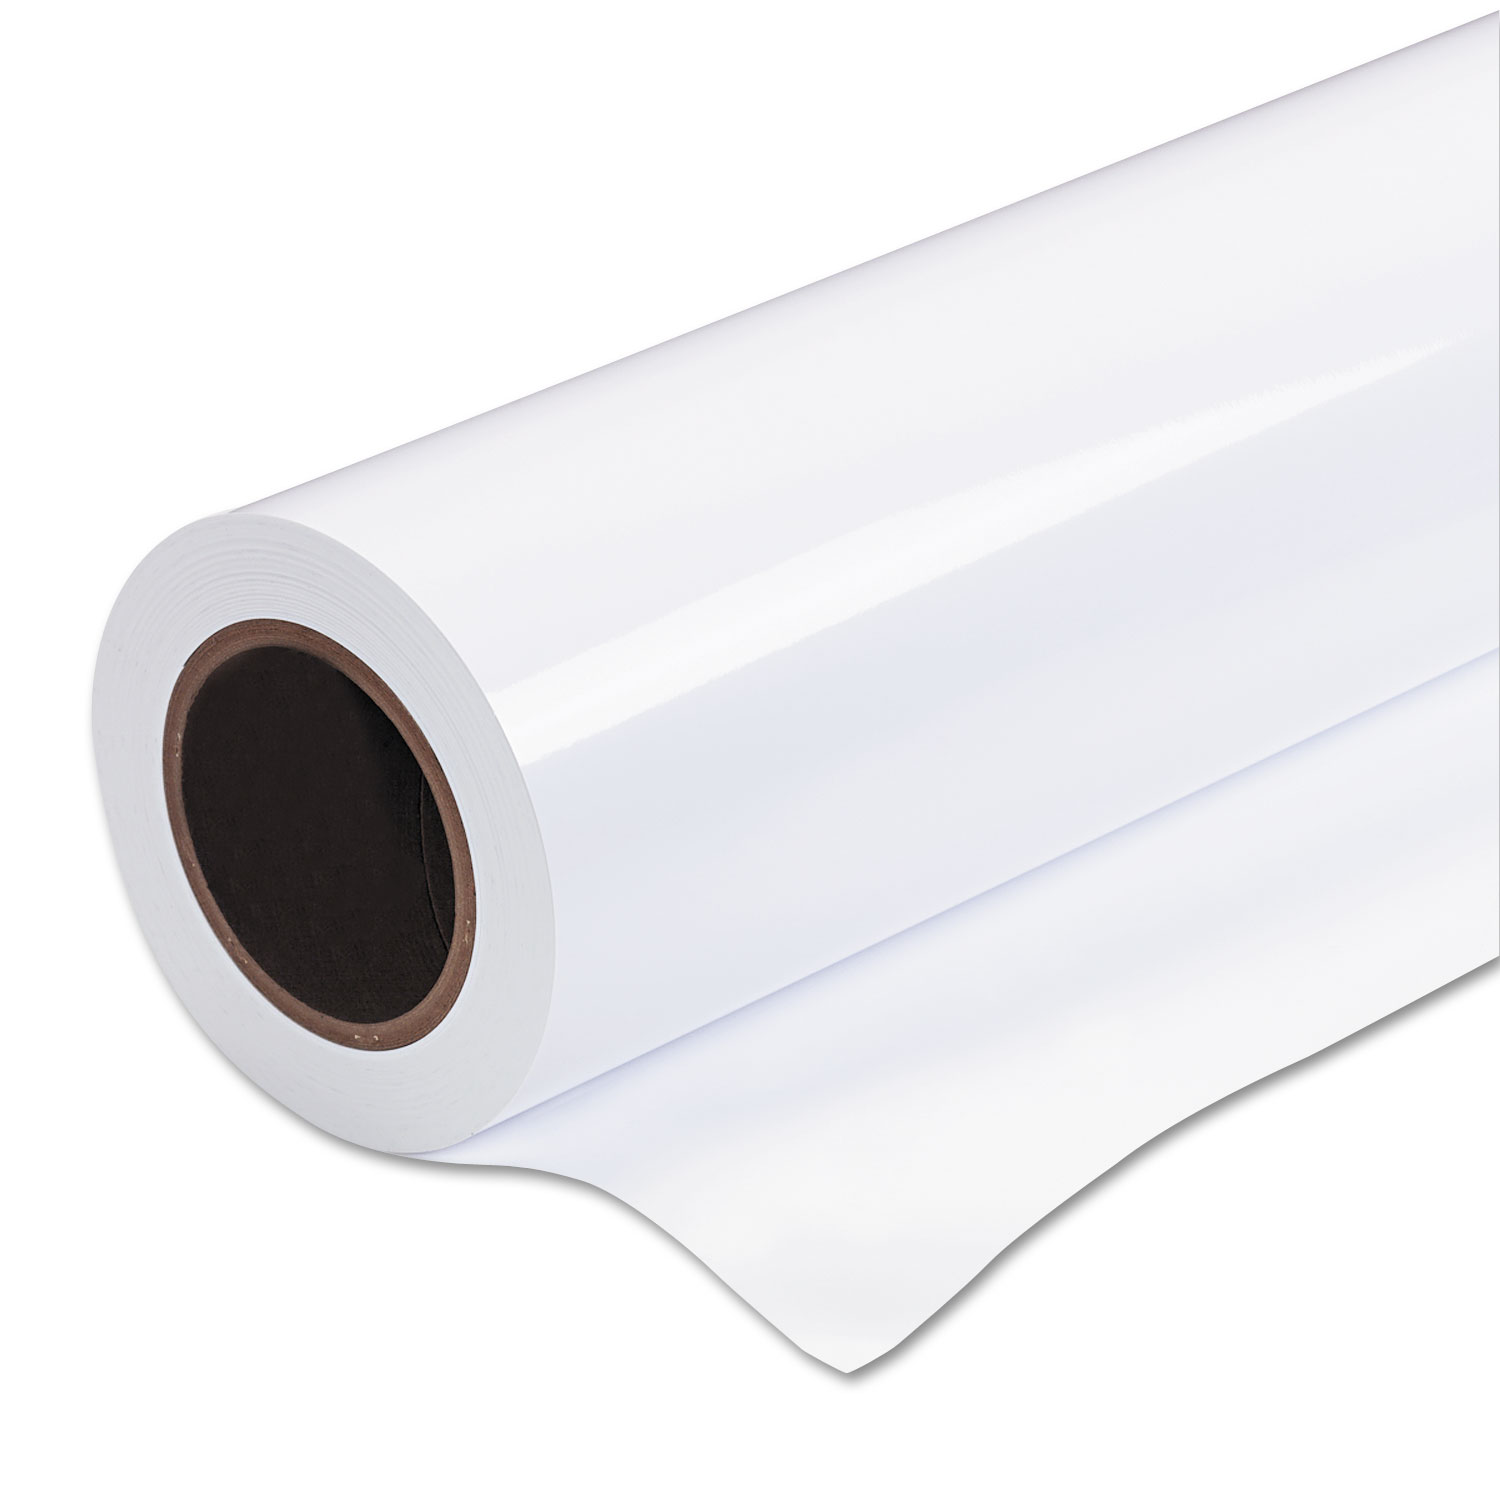 Wide Format Glossy Photo Paper, 8.5 mil, 36 x 100 feet, Roll